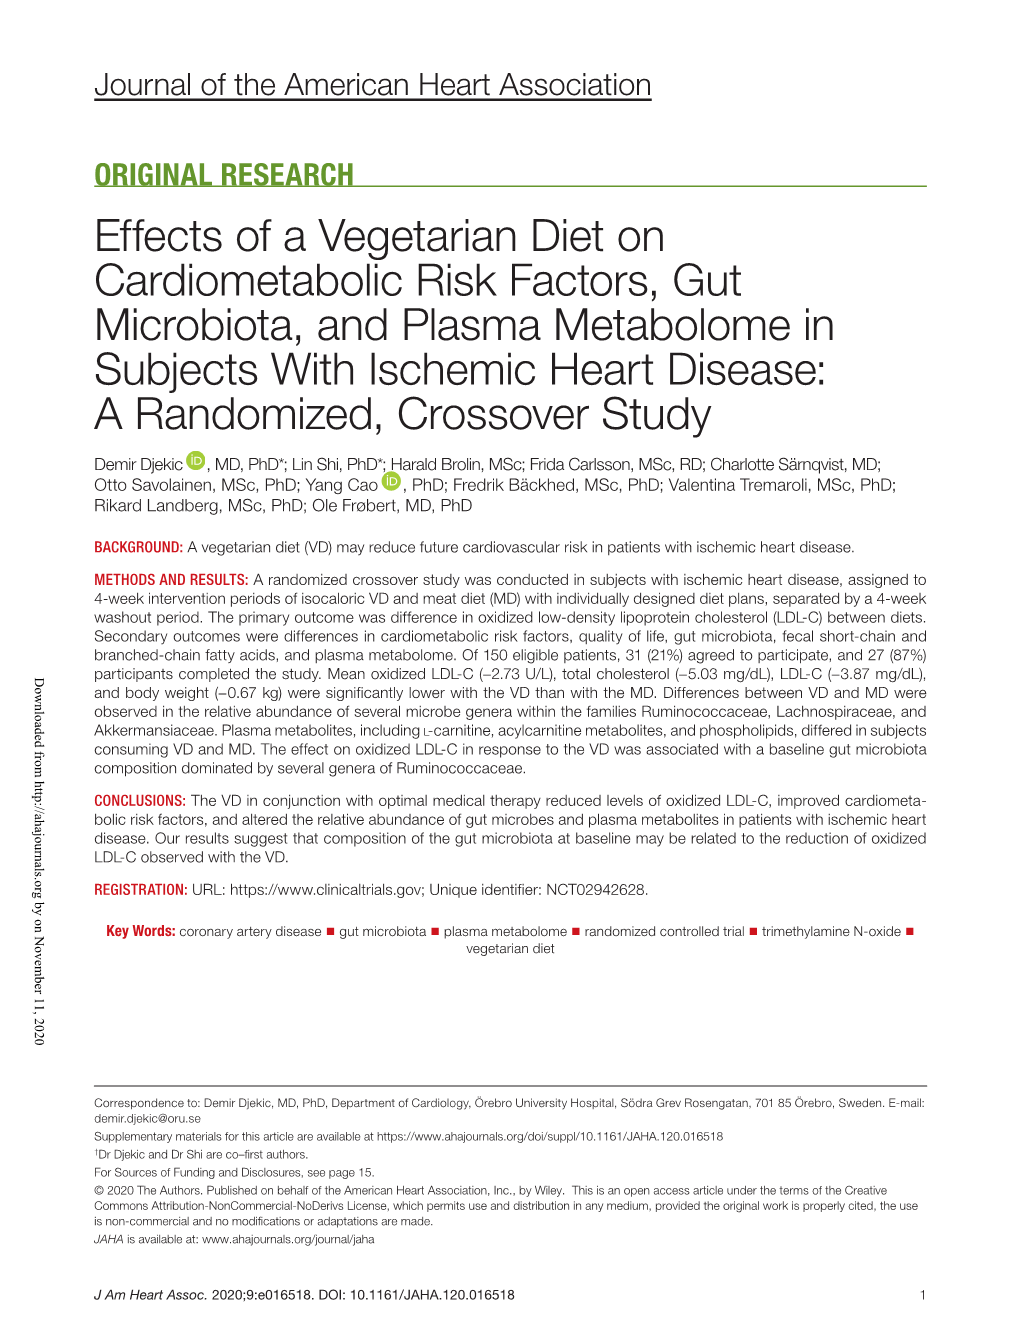 Effects of a Vegetarian Diet on Cardiometabolic Risk Factors, Gut